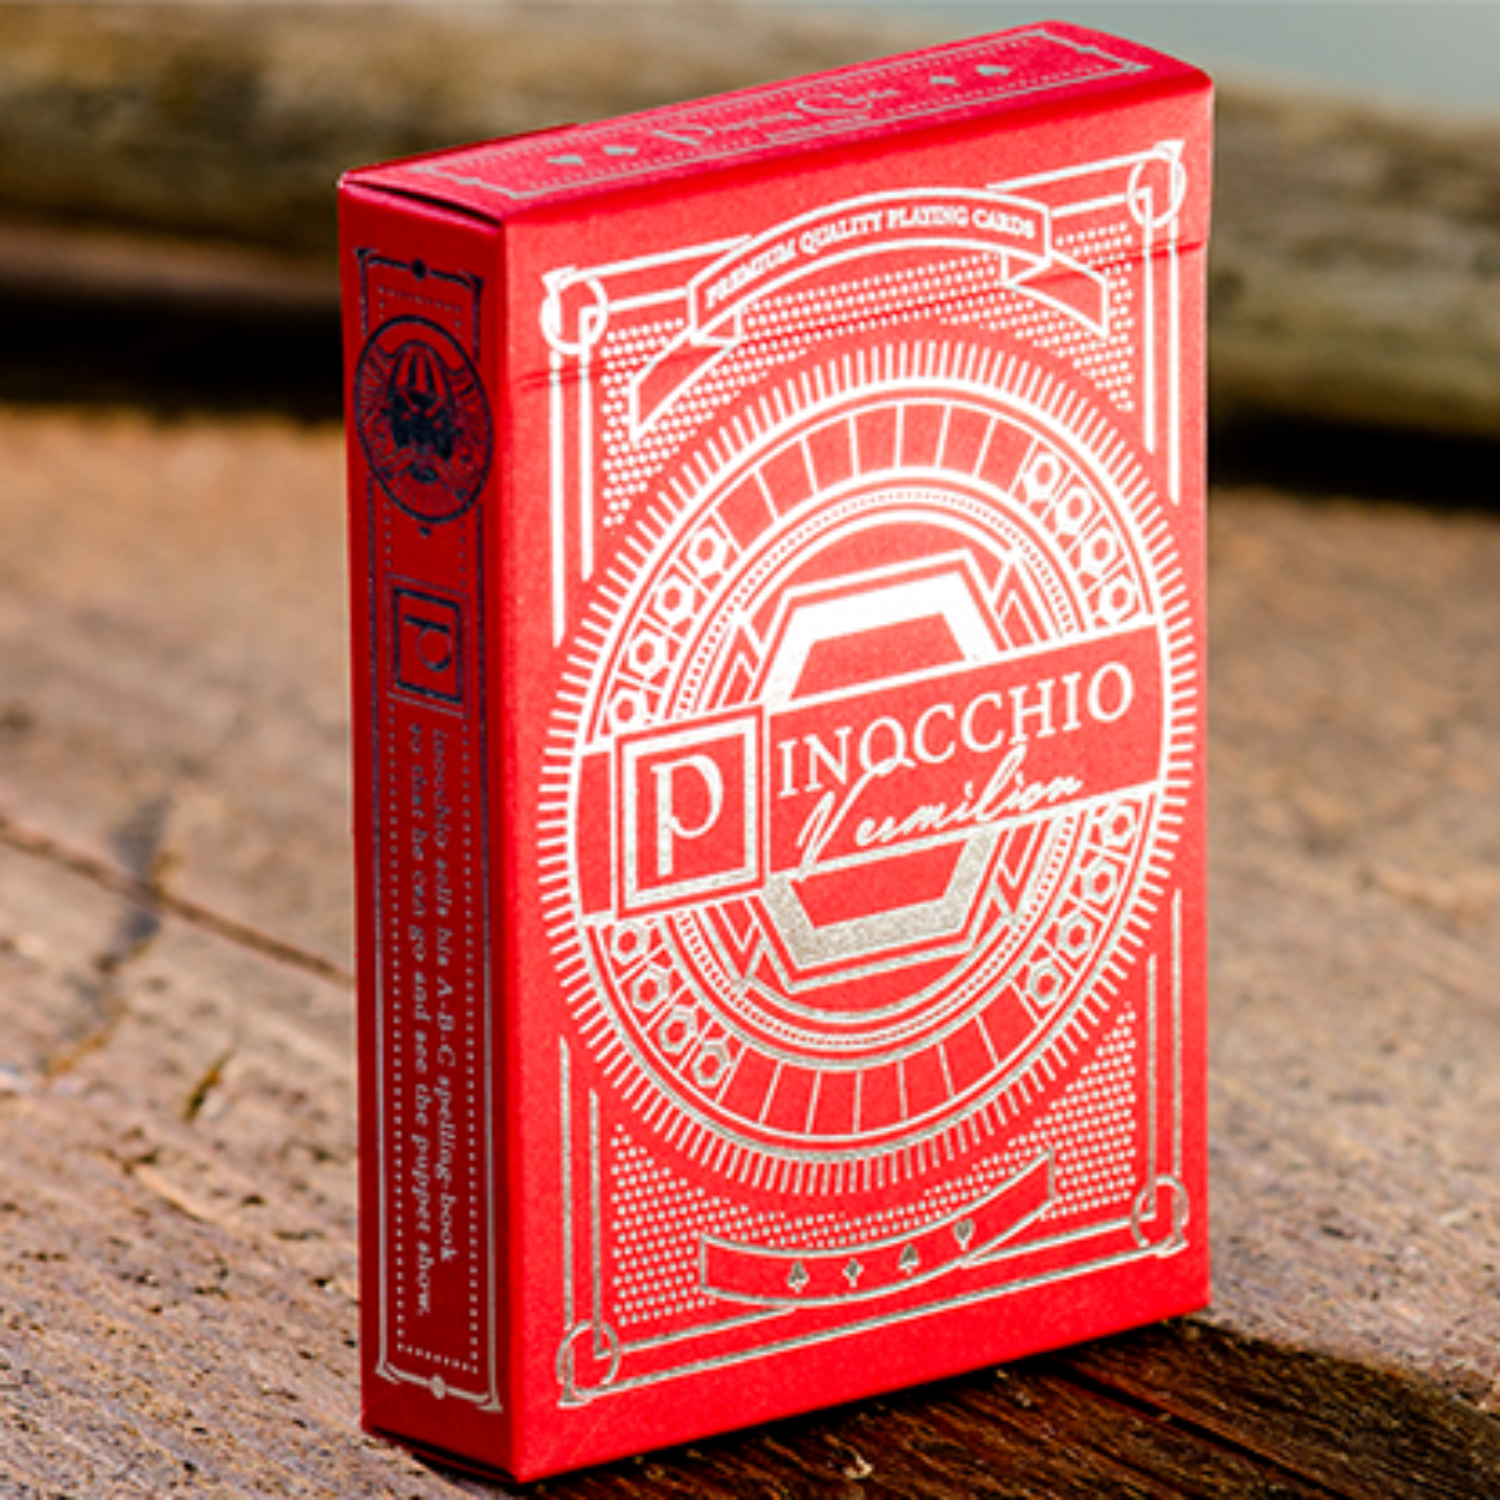 CA28 Pinocchio Vermilion Playing Cards (Red) by Elettra Deganello